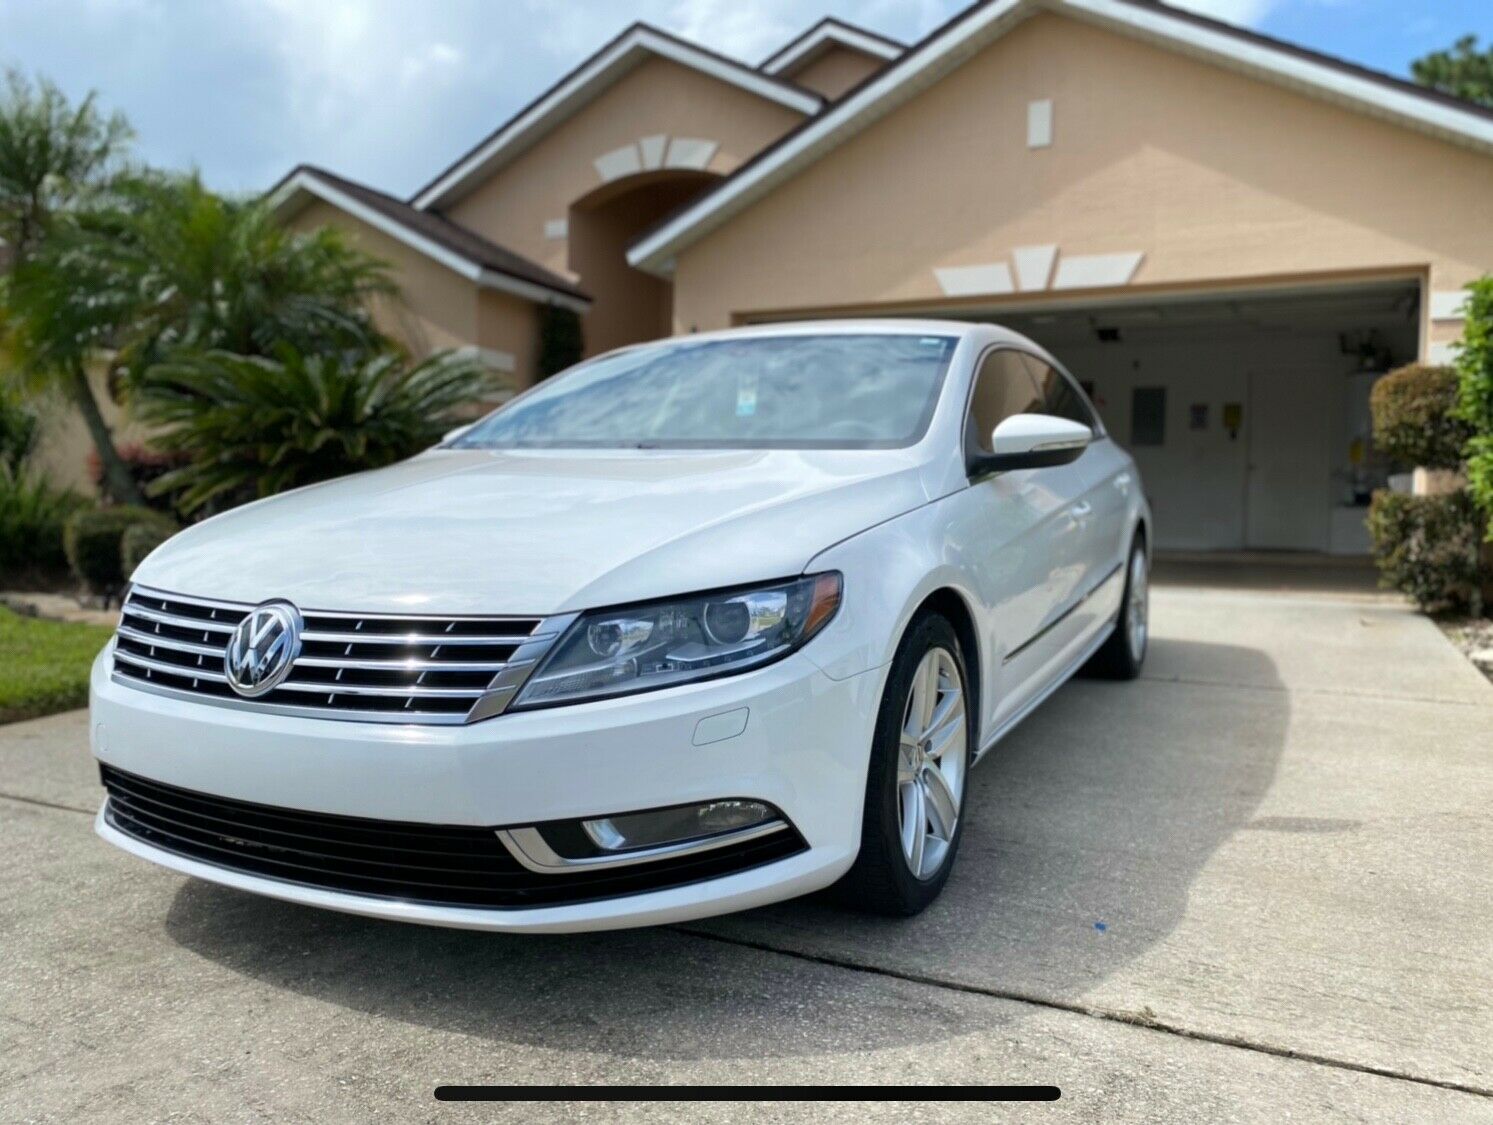 2013 Volkswagen Cc Sport Condition Is &quot;used&quot;. White Exterior,two Tone Interior, Great Condition